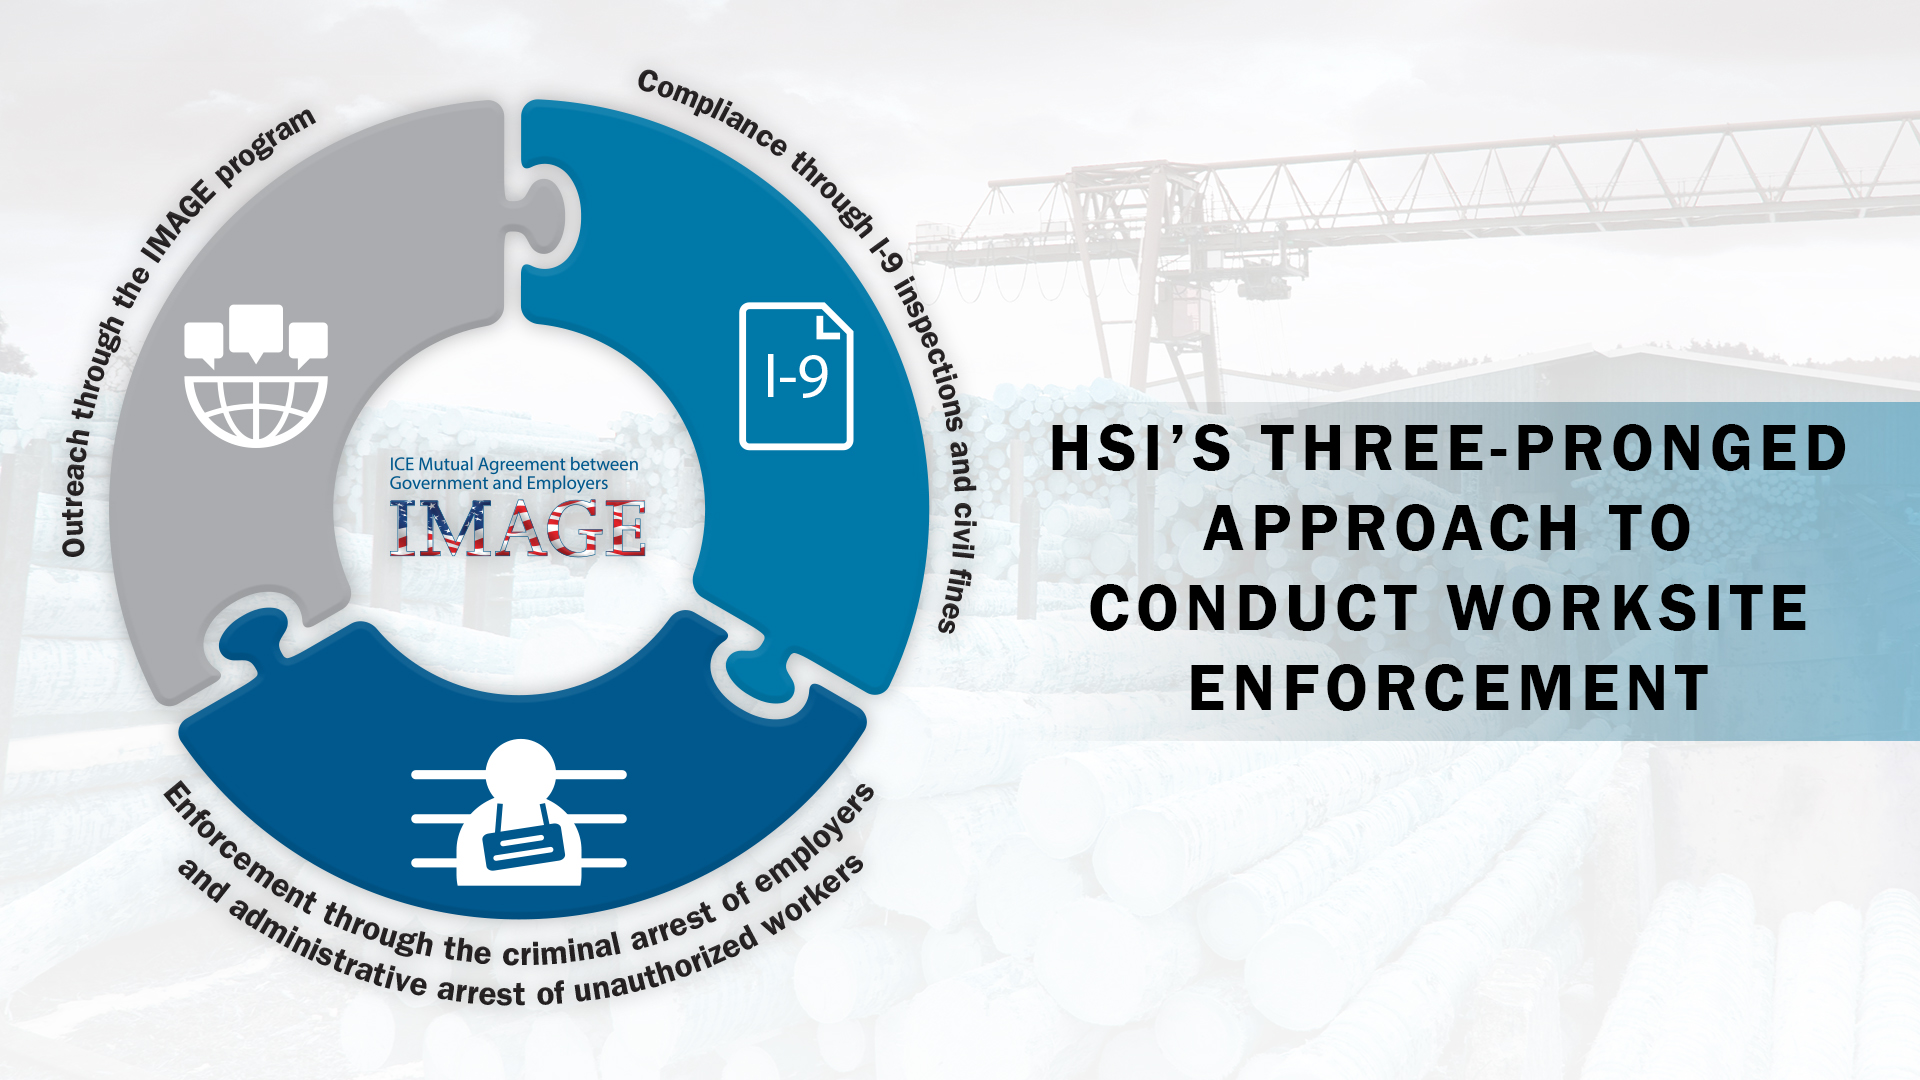 HSI's three prong approach to conduct worksite enforcement